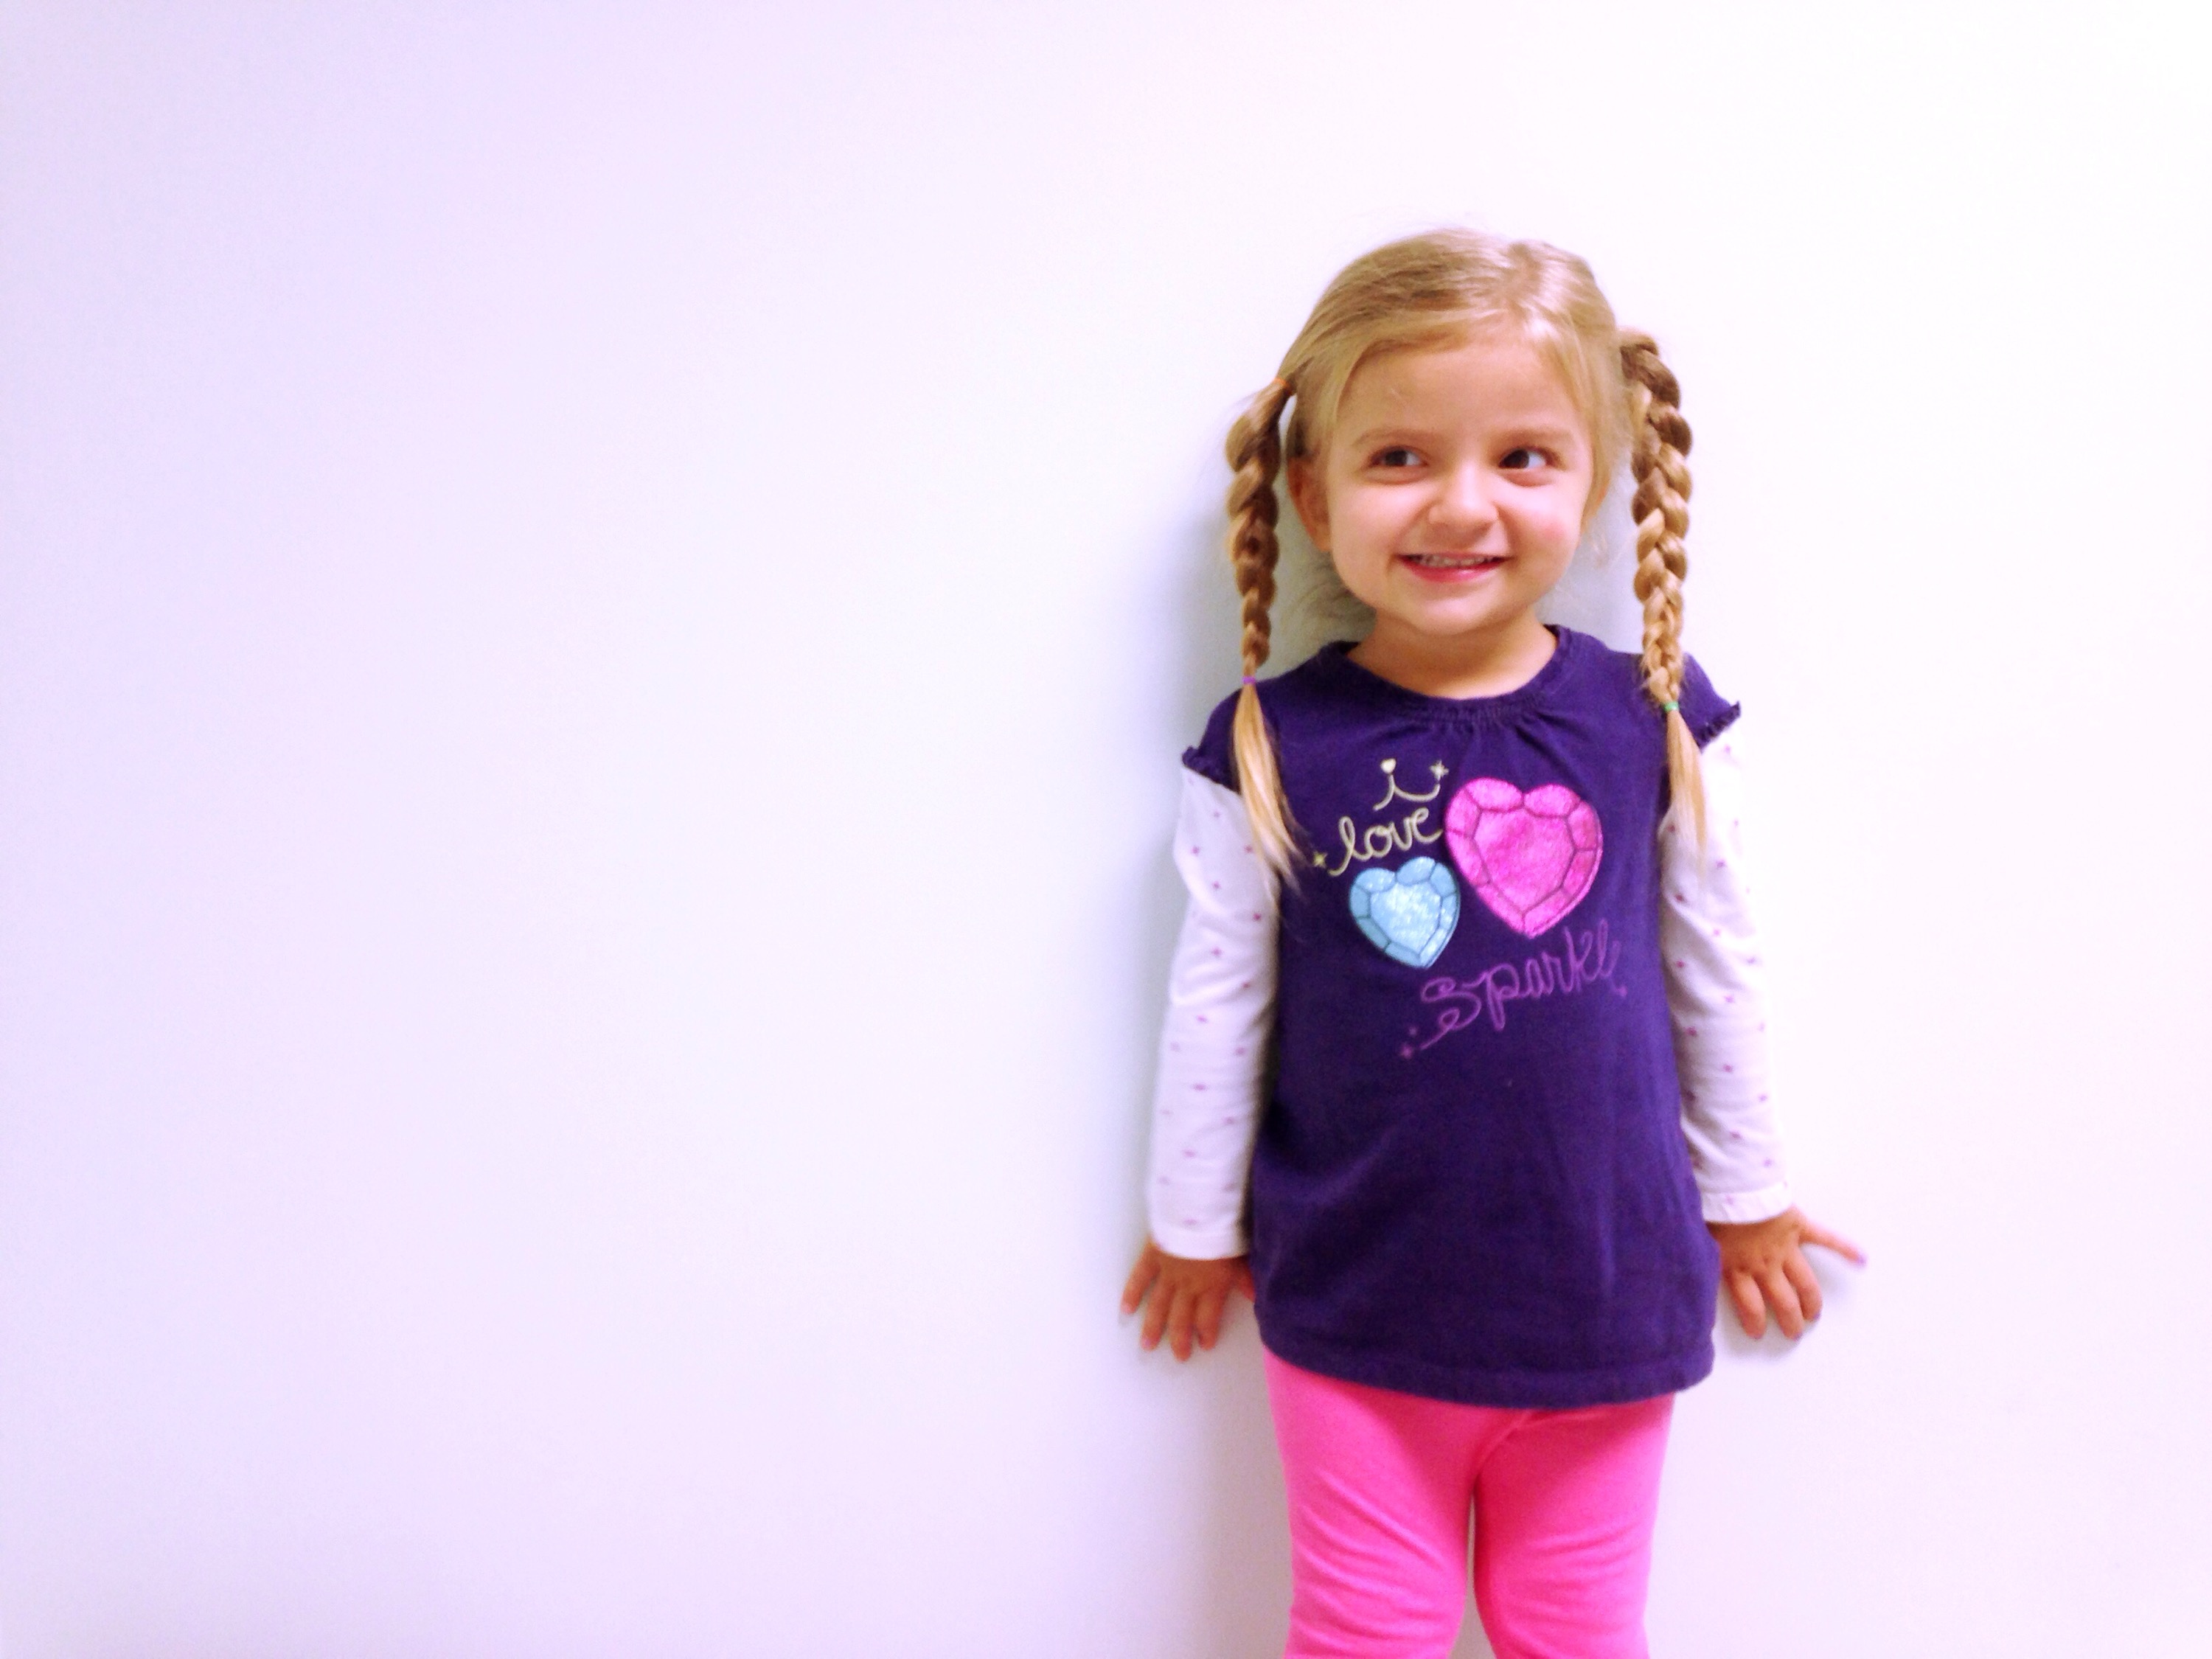 Five Reasons I Love Being Around Three-Year-Olds